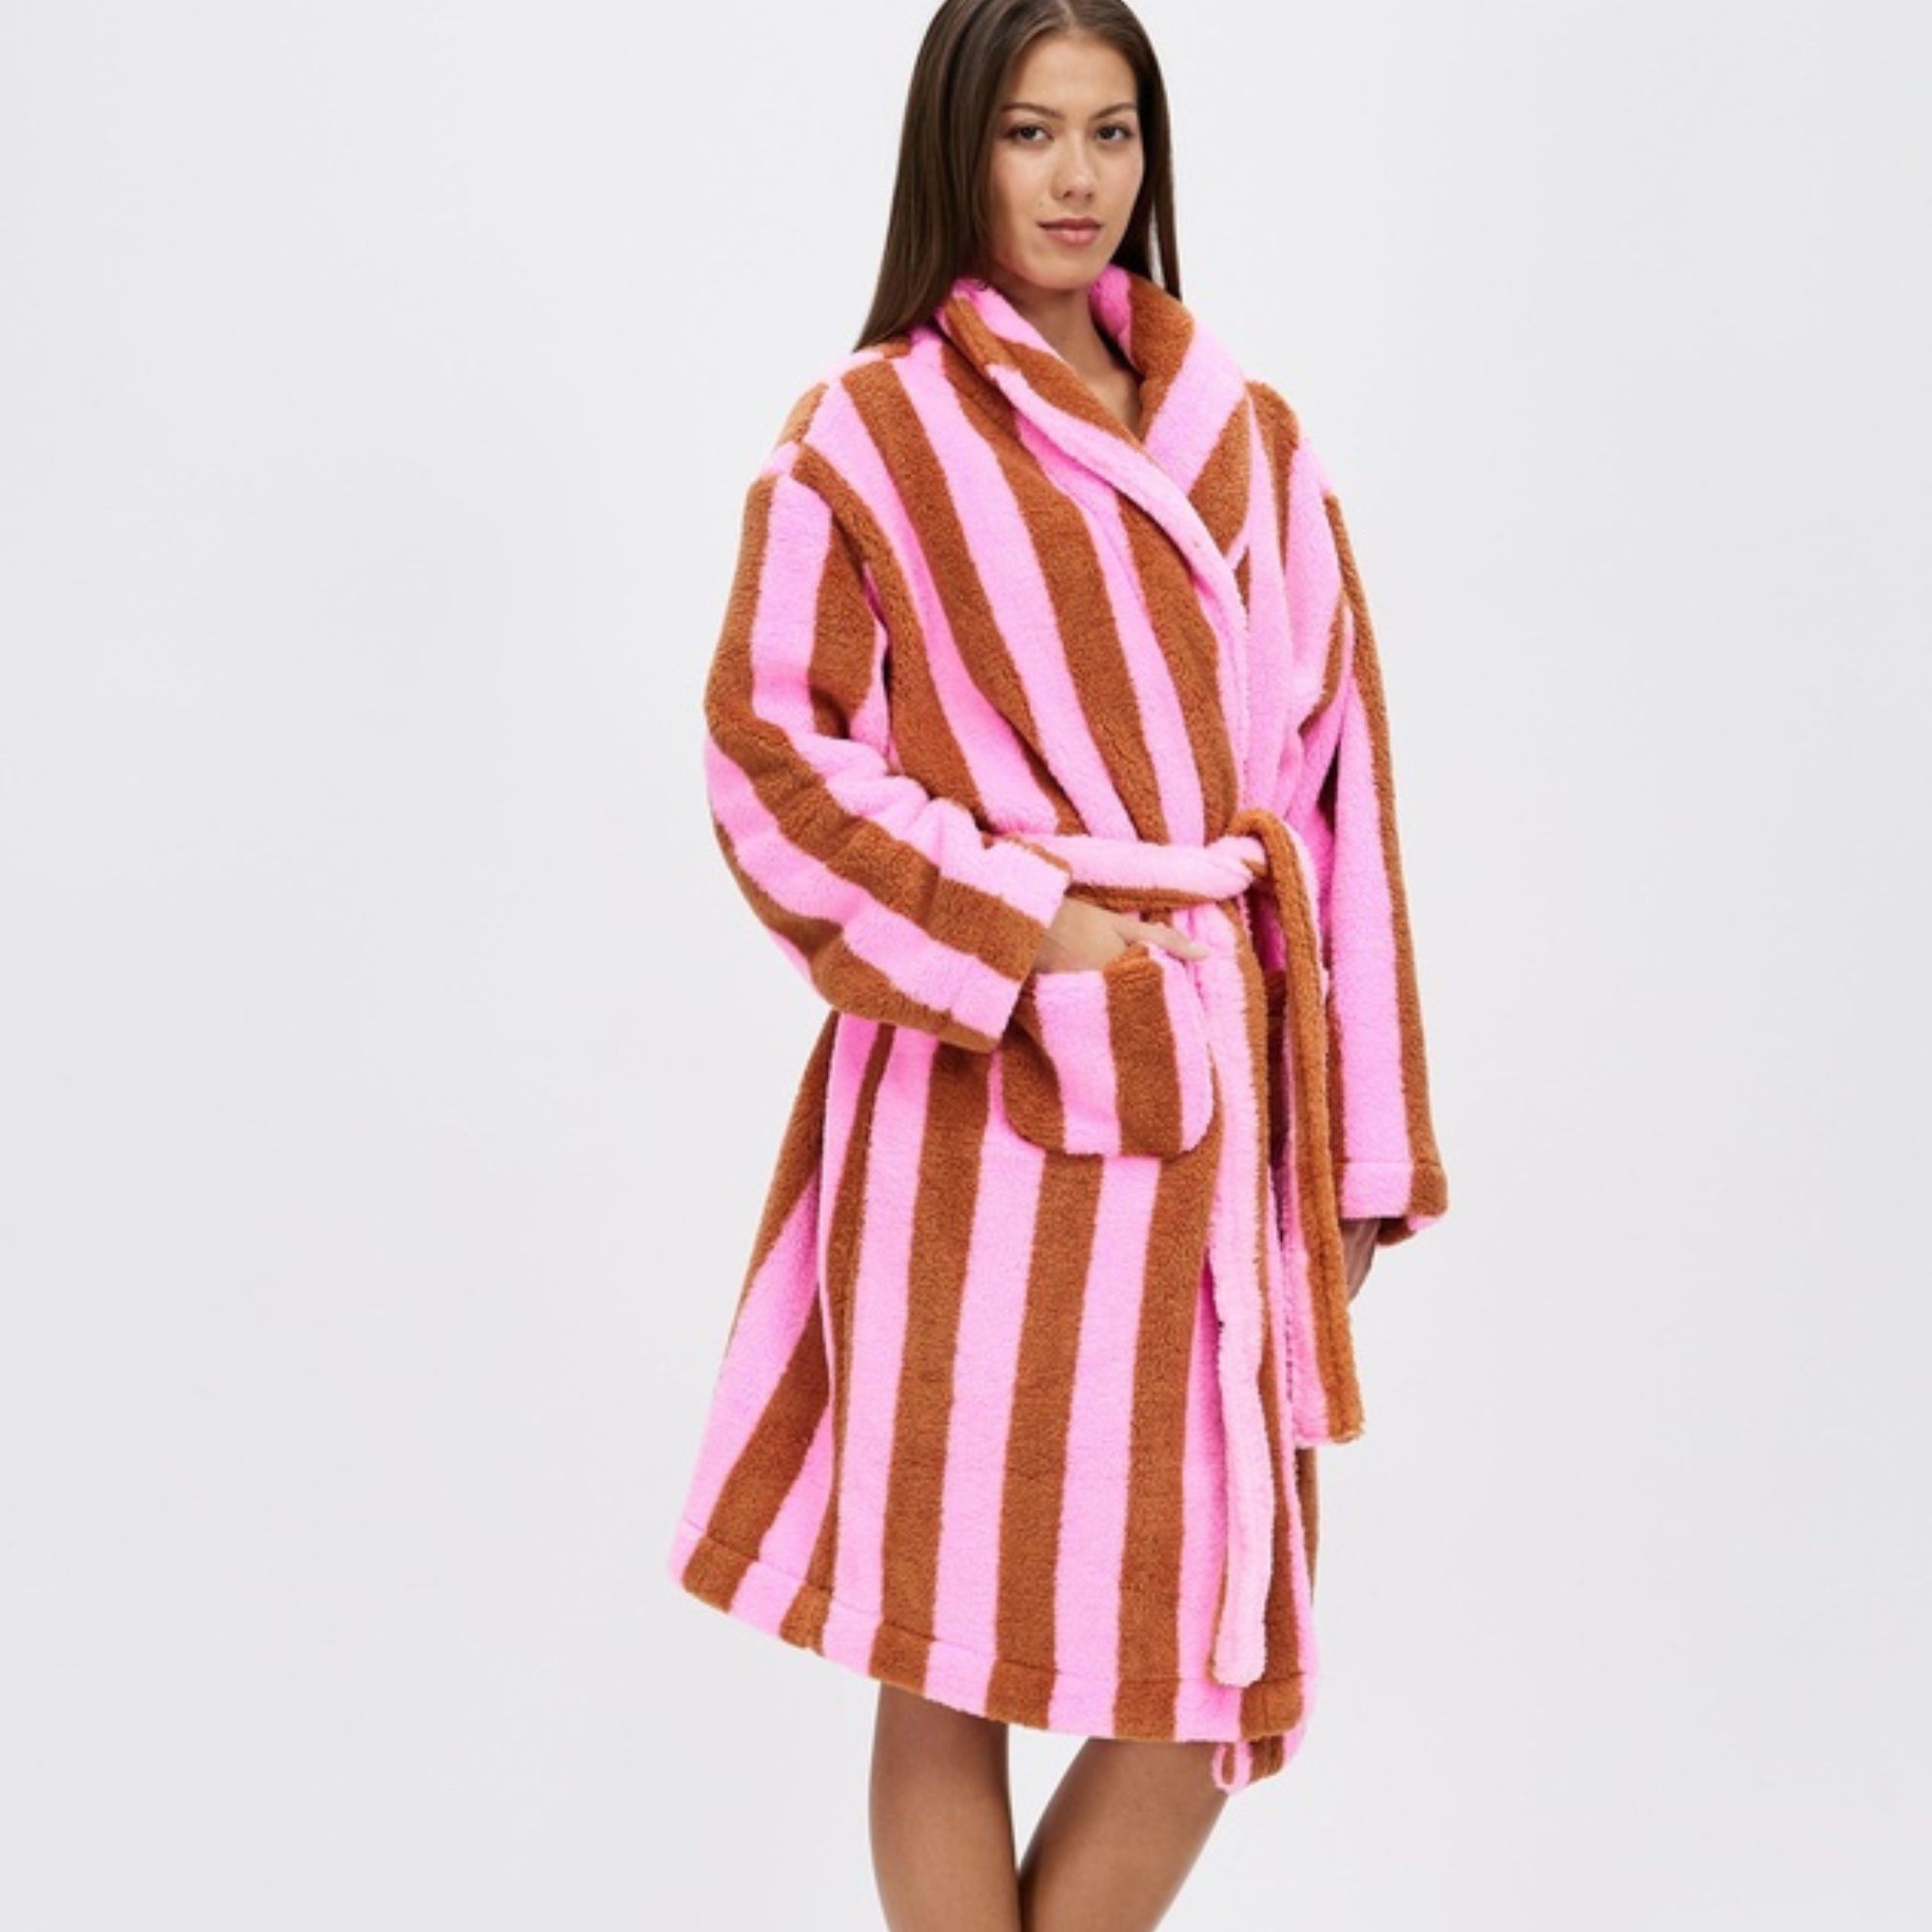 The Best Dressing Gowns to Channel Hotel-Level Relaxation